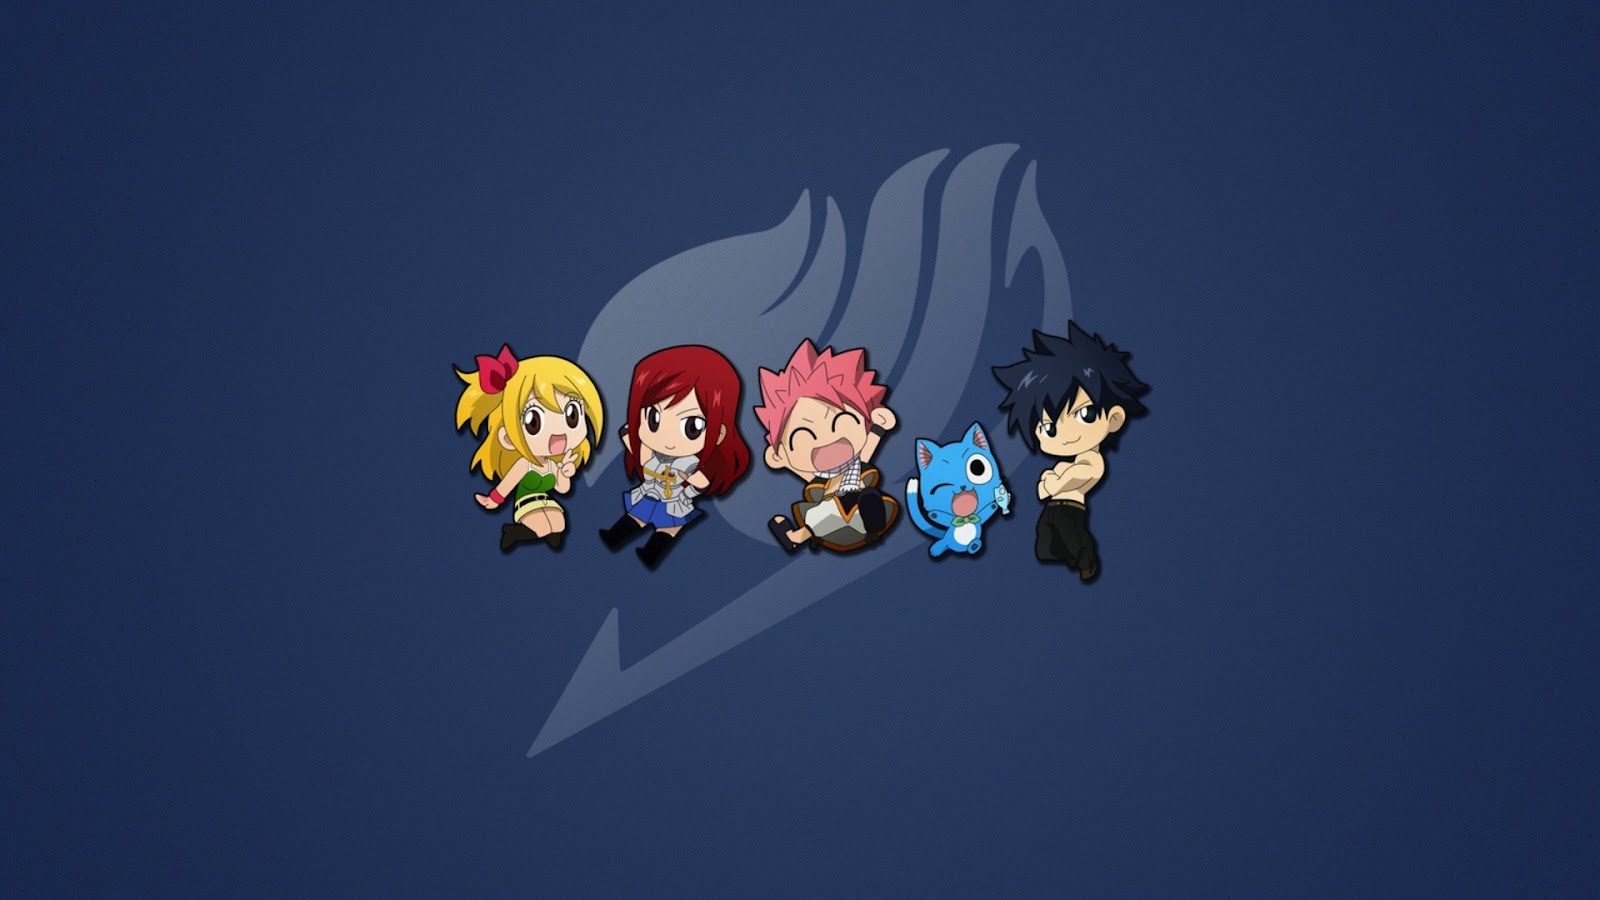 Your Wallpaper Fairy Tail